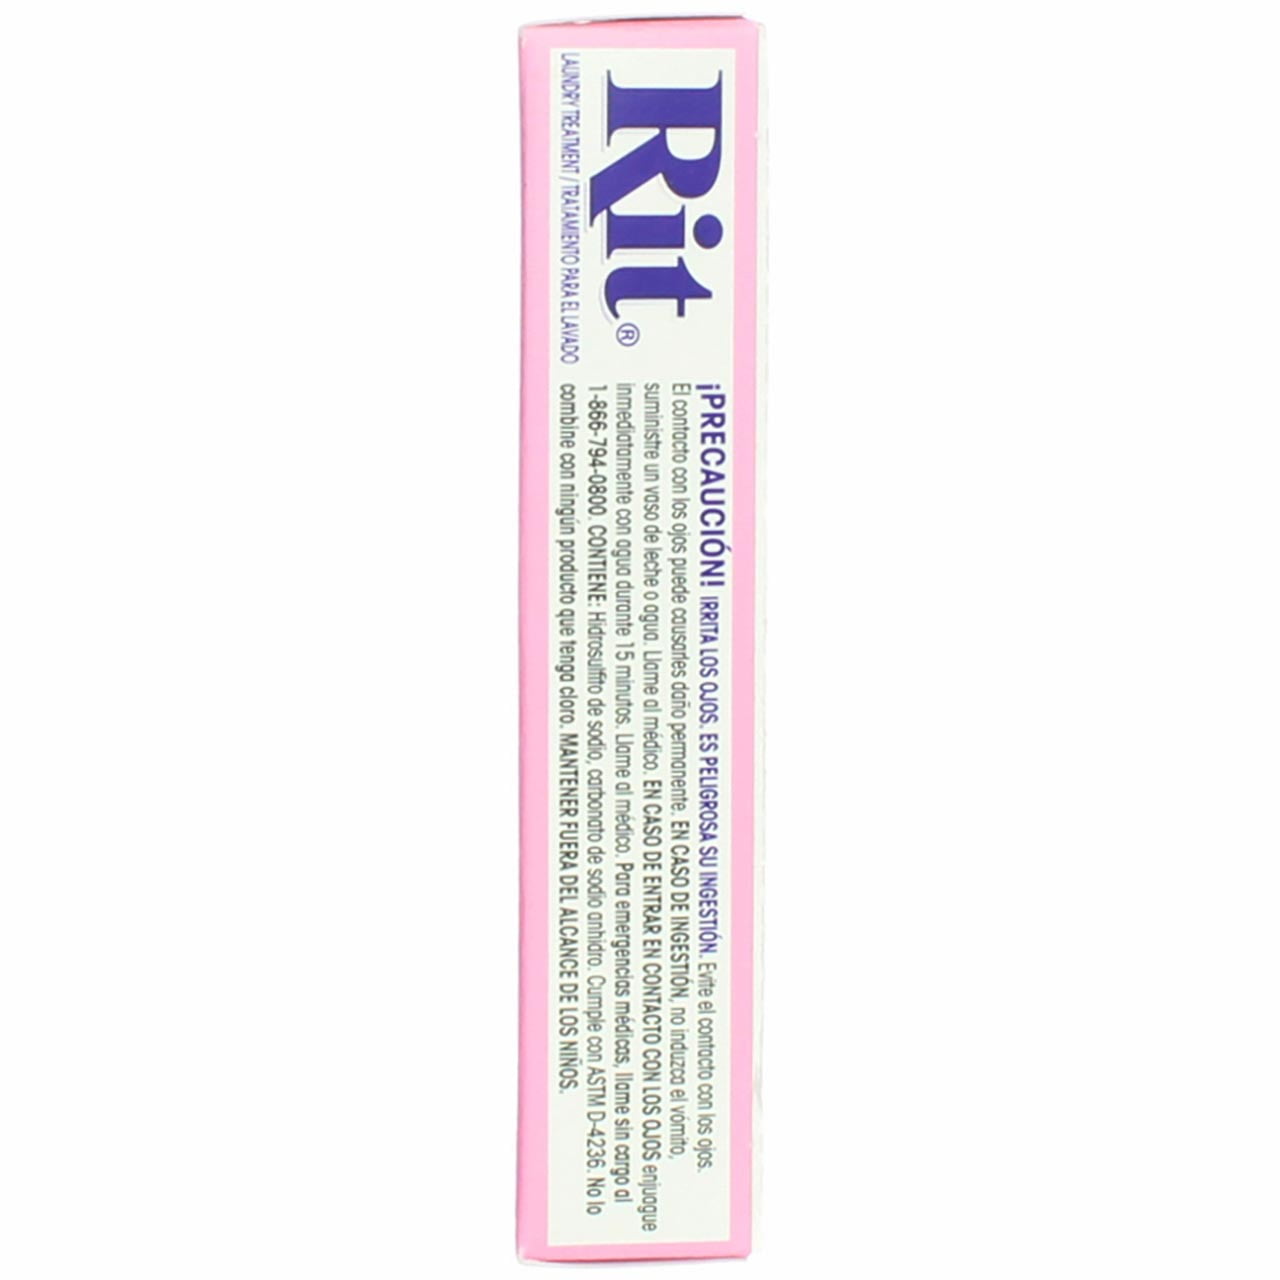 Find the Rit® Laundry Treatment Colour Remover at Michaels